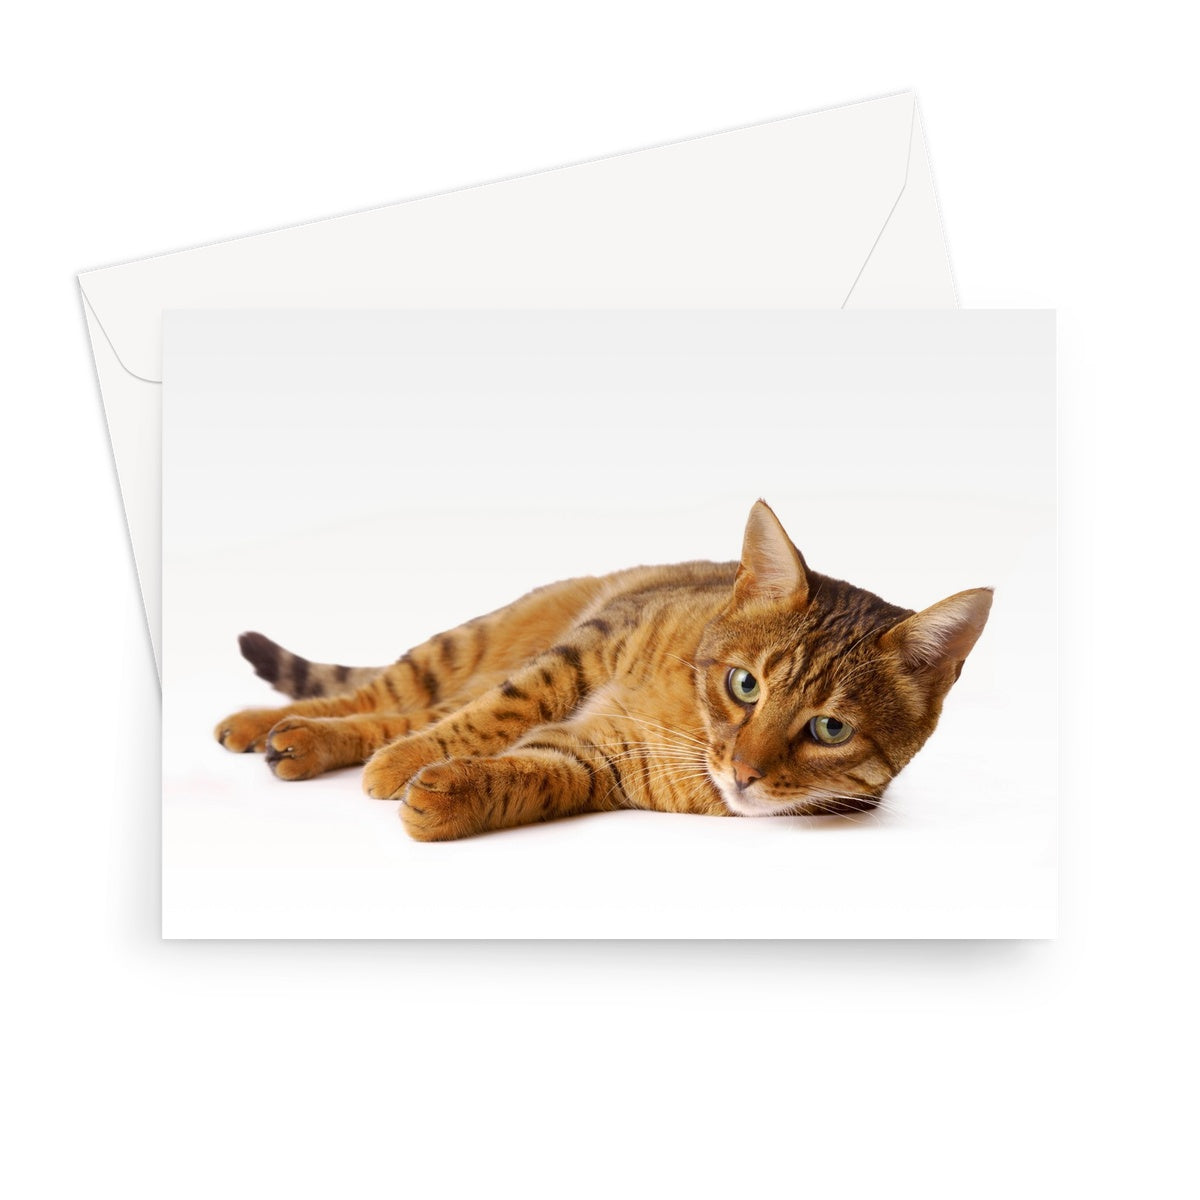 Bengal cat lying on its side on a white background Greeting Card